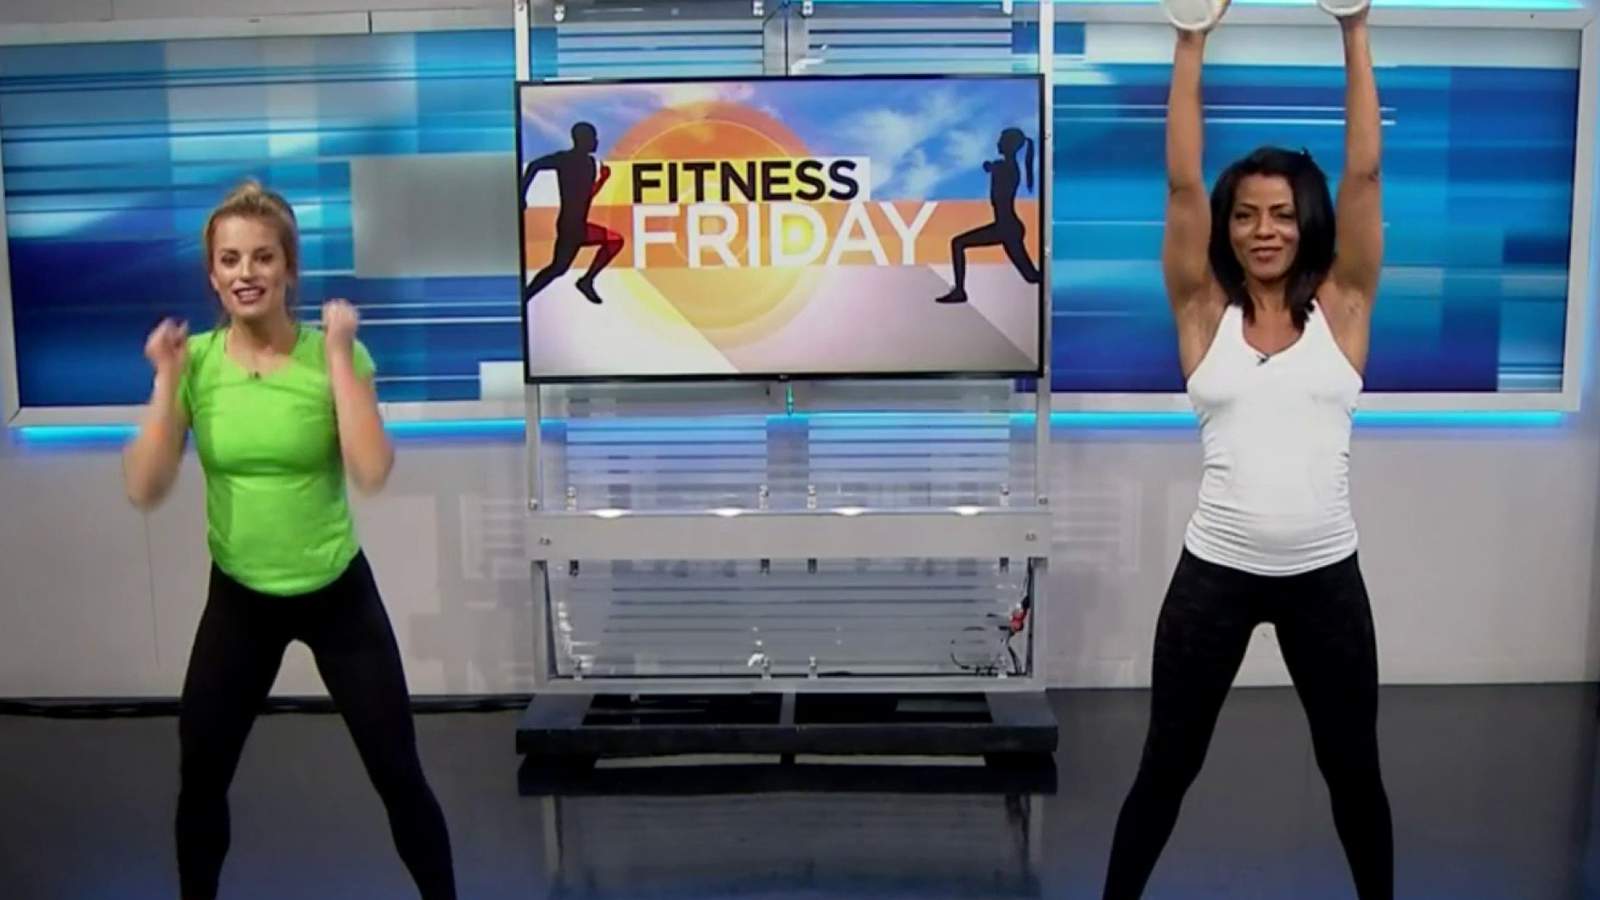 Fitness Friday: Simple workouts to do at home